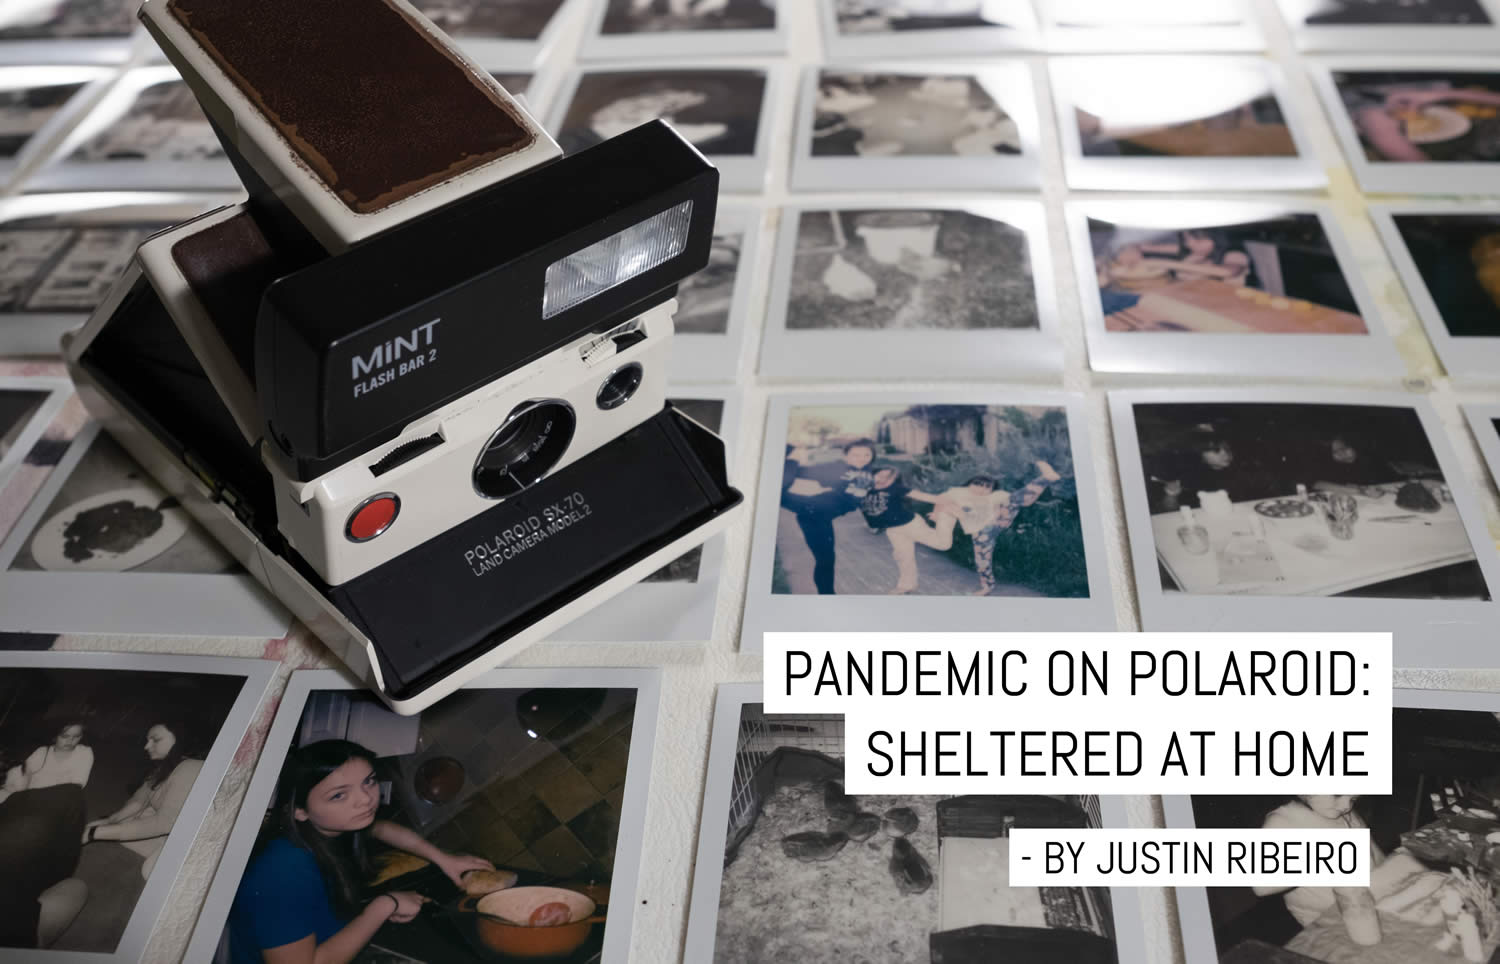 Instant Camera, Vintage Style: Is the Polaroid Now Worth It? (Review) •  Valerie & Valise